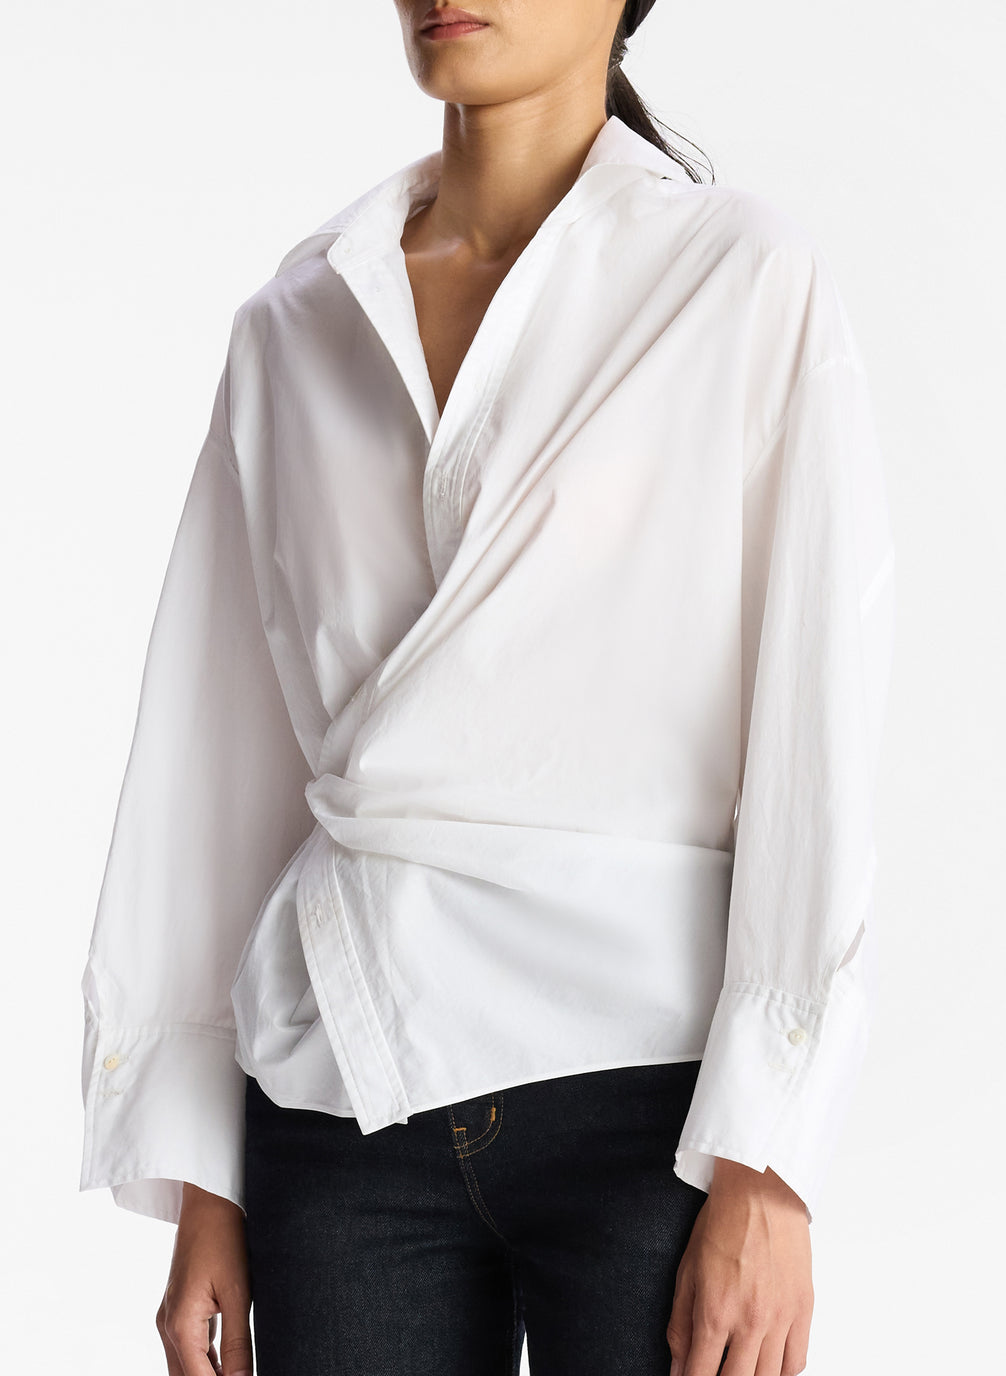 detail view of woman wearing white collared cotton wrap top and dark wash denim jeans